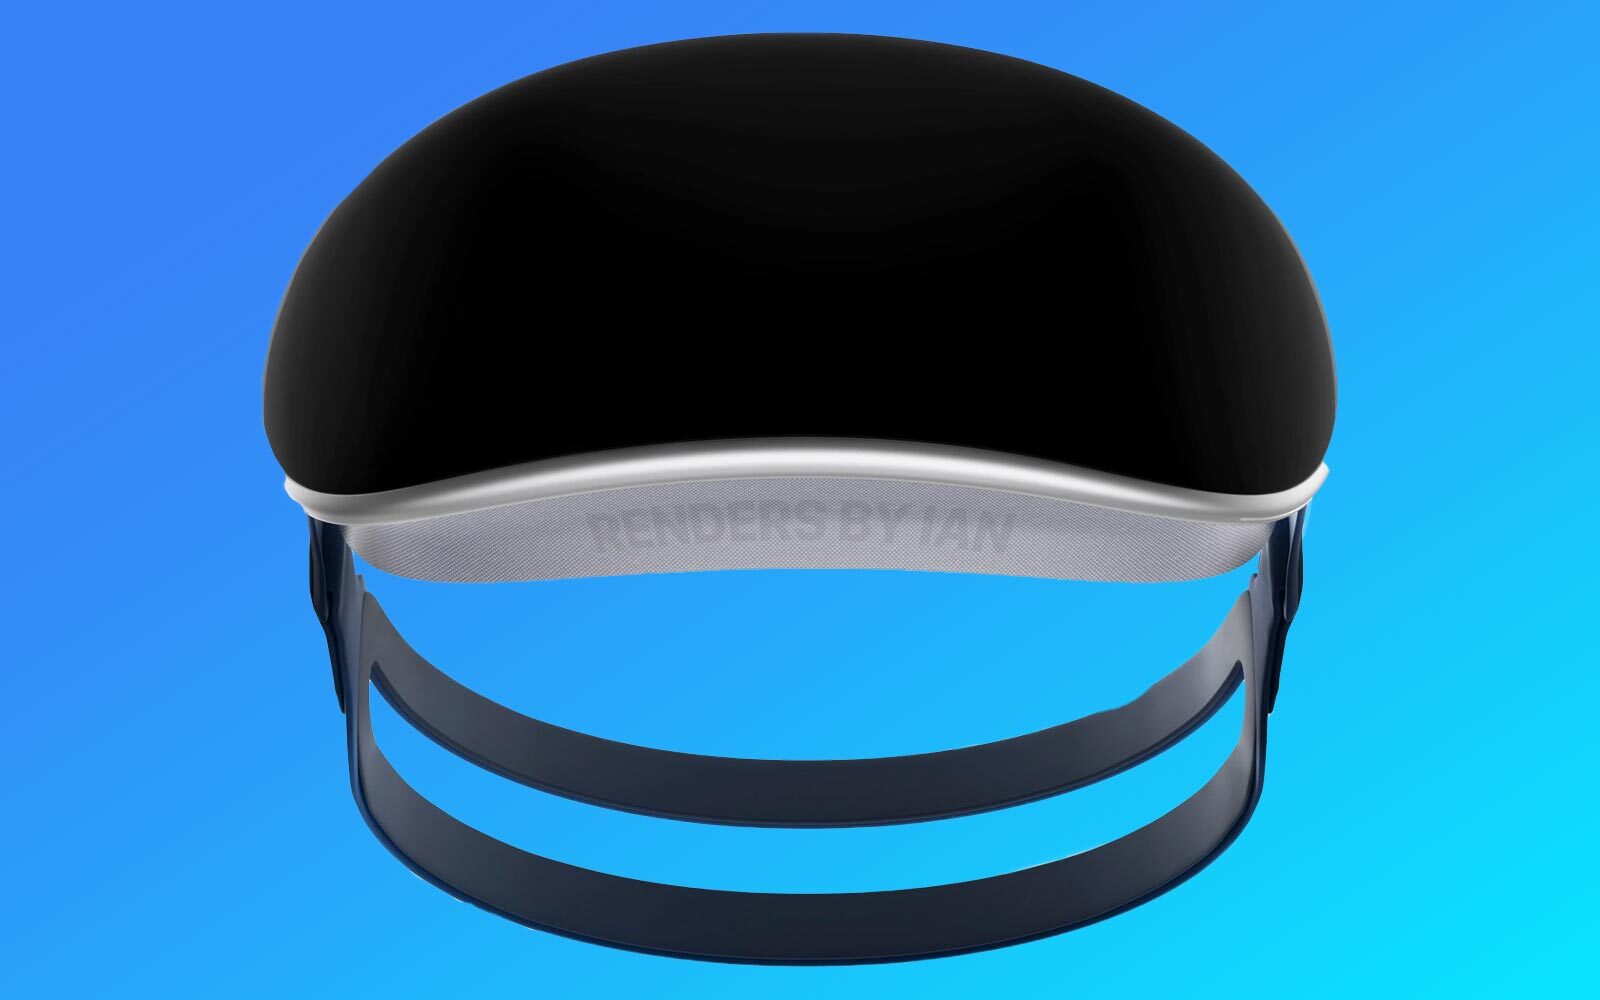 Apple mixed reality glasses render - front view.